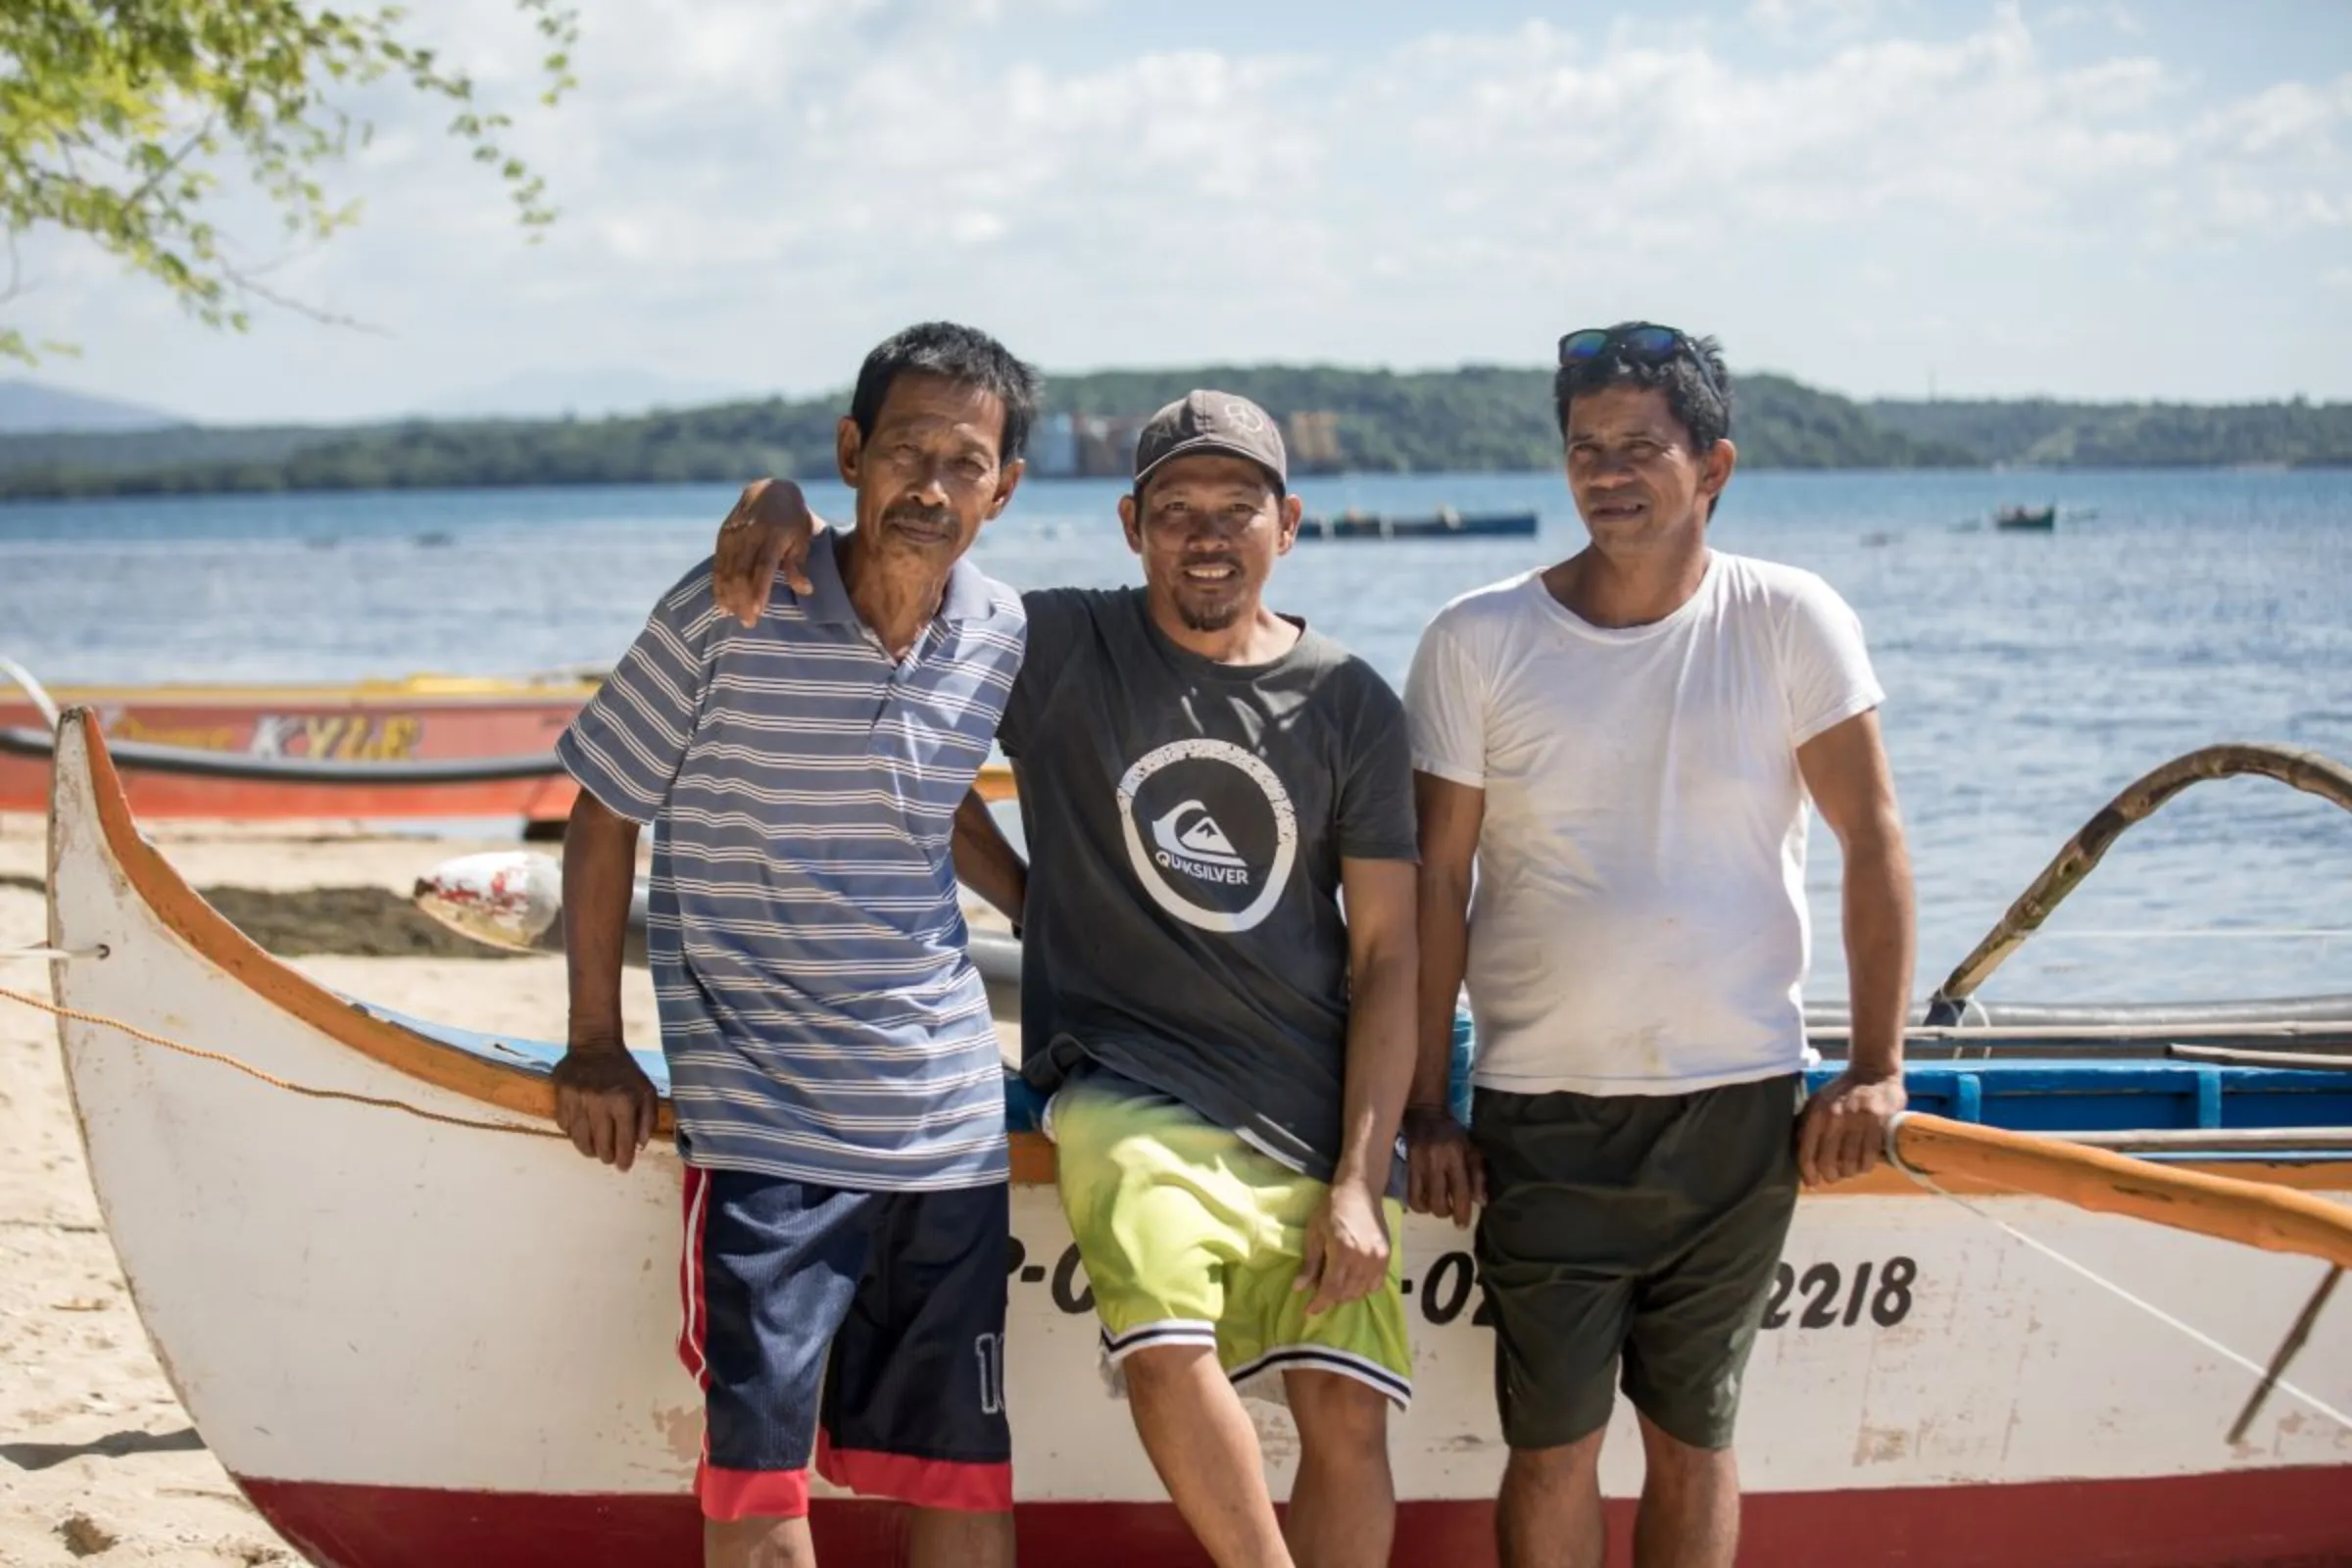 Fishermen Rony Drio (L), Job Emata and Jimmy Tabat pose in front of a boat on a beach in San Salvador Island, Masinloc in Zambales Province in the Philippines. Fishermen on the island say China’s attempts to block them from fishing at the Scarborough Shoal is costing them money and threatening their livelihoods. Nov. 16, 2023. Thomson Reuters Foundation/Kathleen Limayo